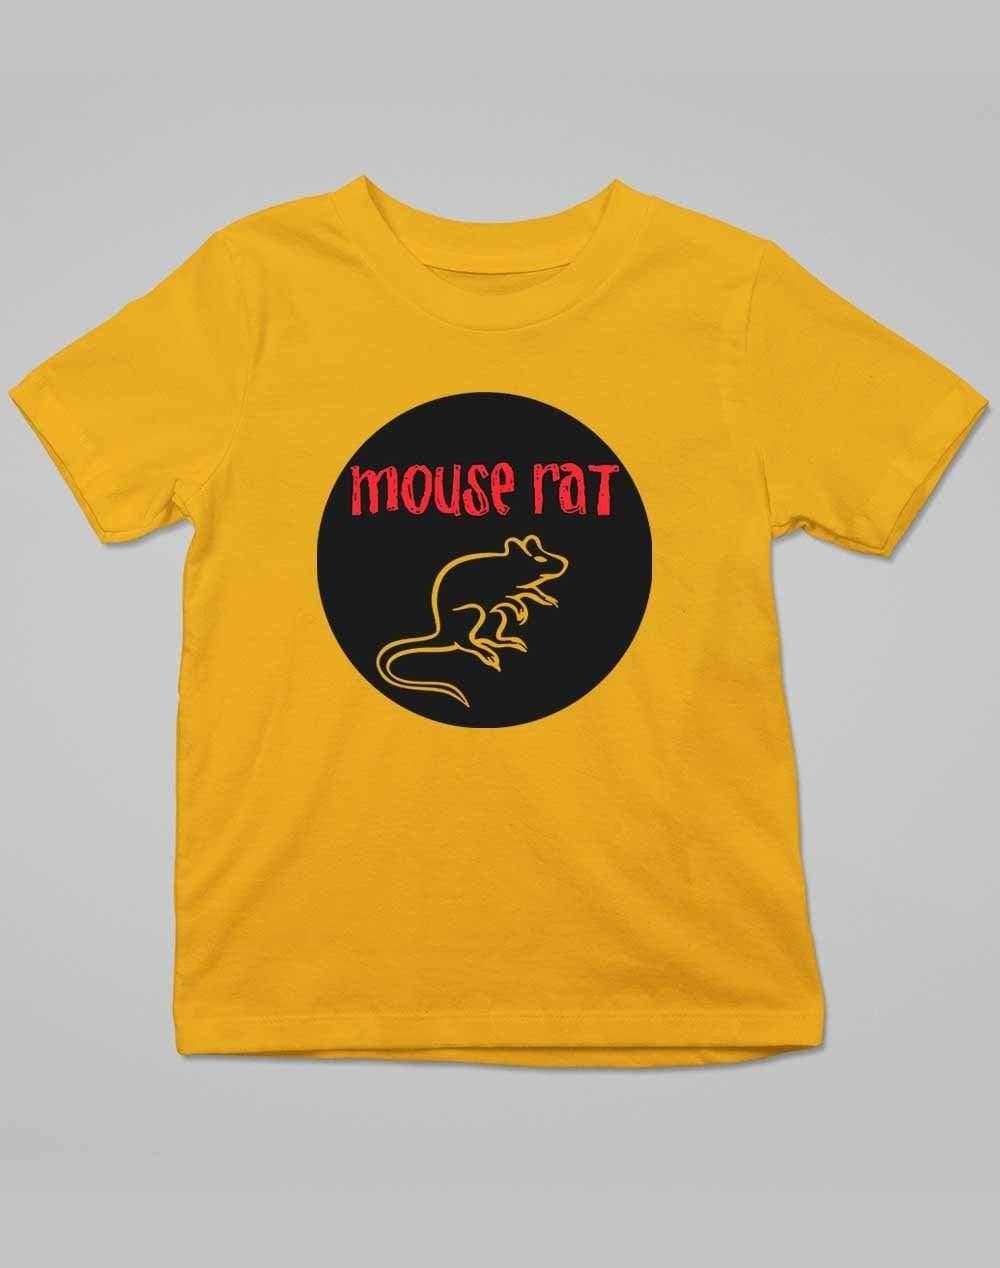 Mouse Rat Round Logo Kids T-Shirt 3-4 years / Gold  - Off World Tees